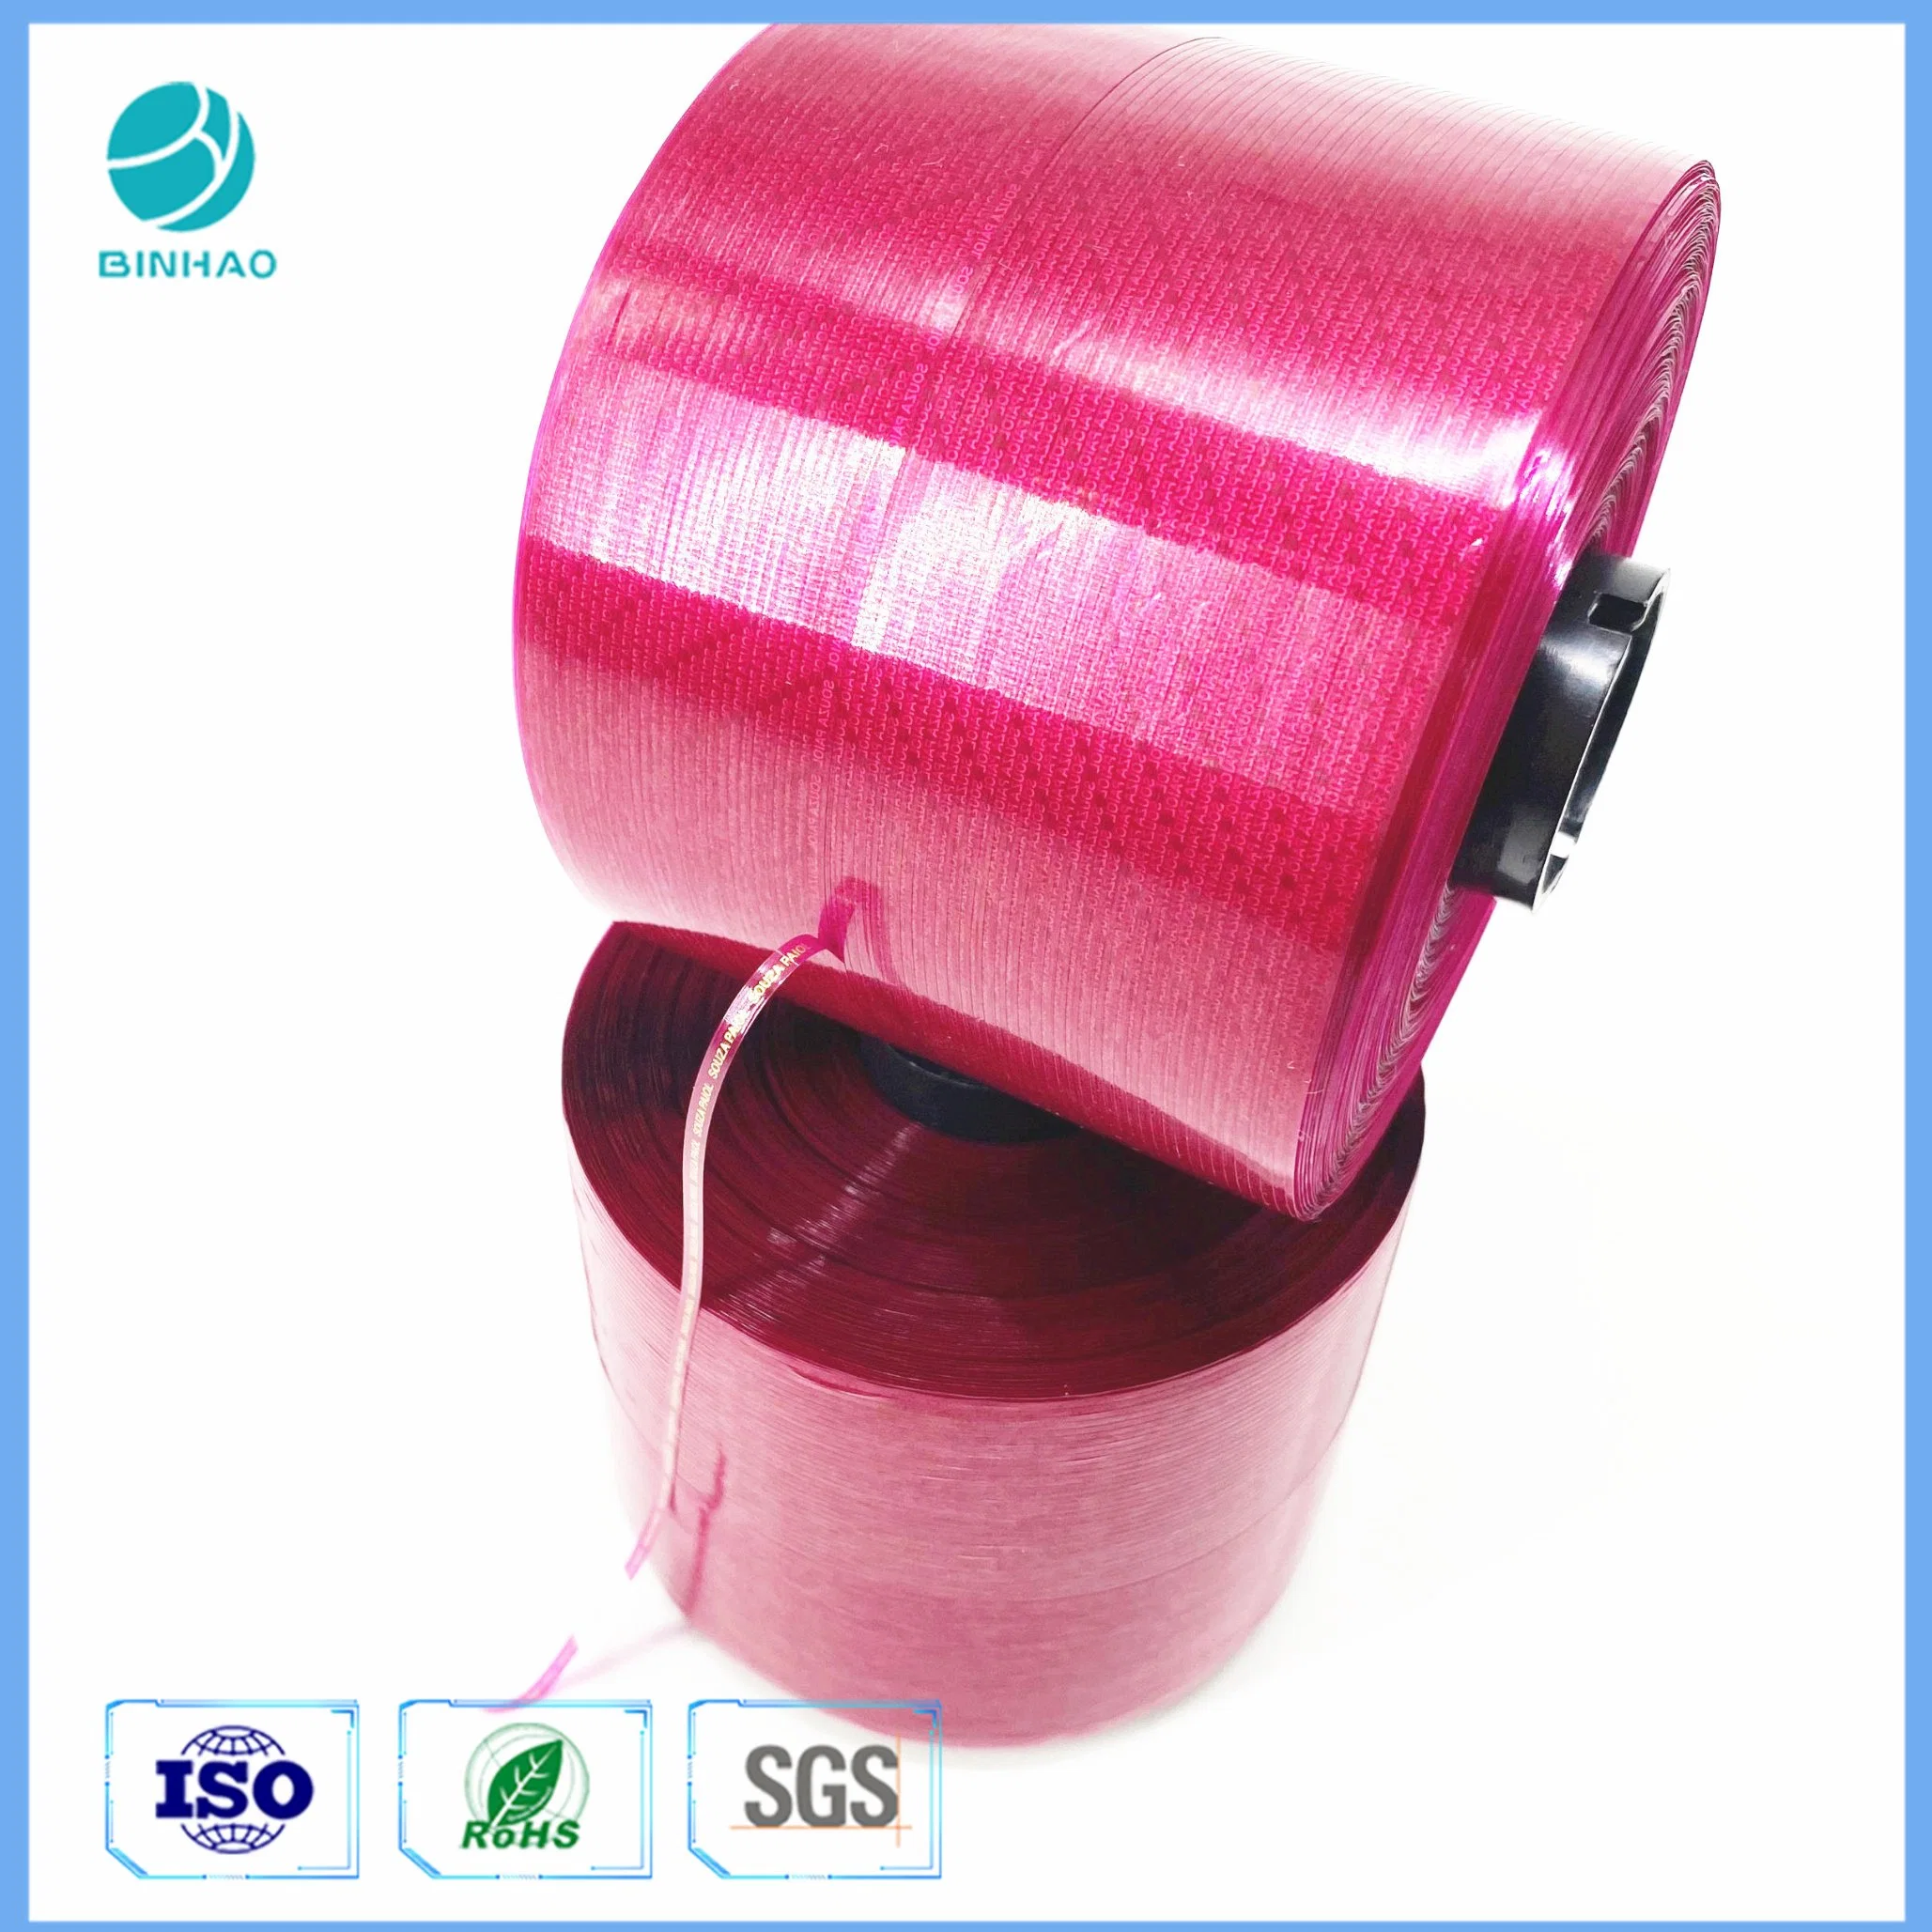 Red 4mm Mopp Envelop Adhesive Strips Tapes for Sealing The BOPP Film